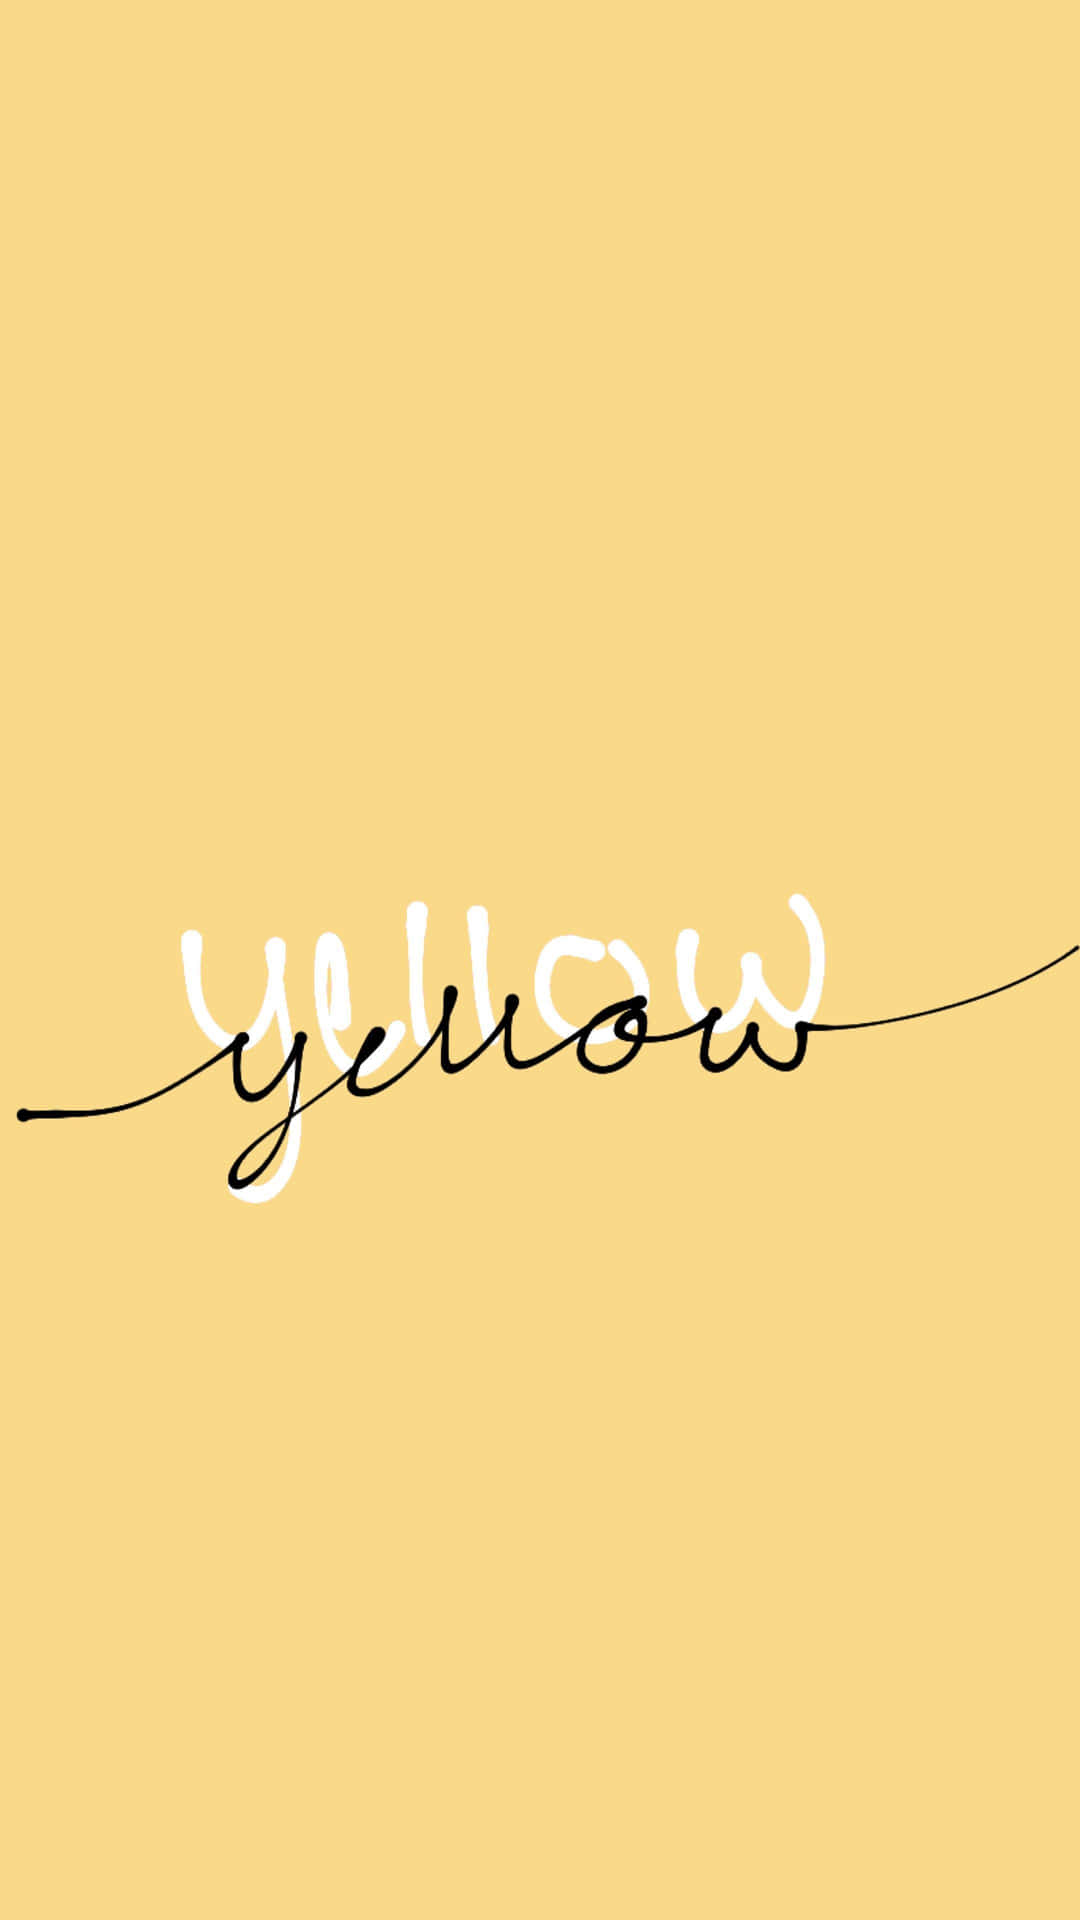 Brighten up your device with this cheerful yellow phone background